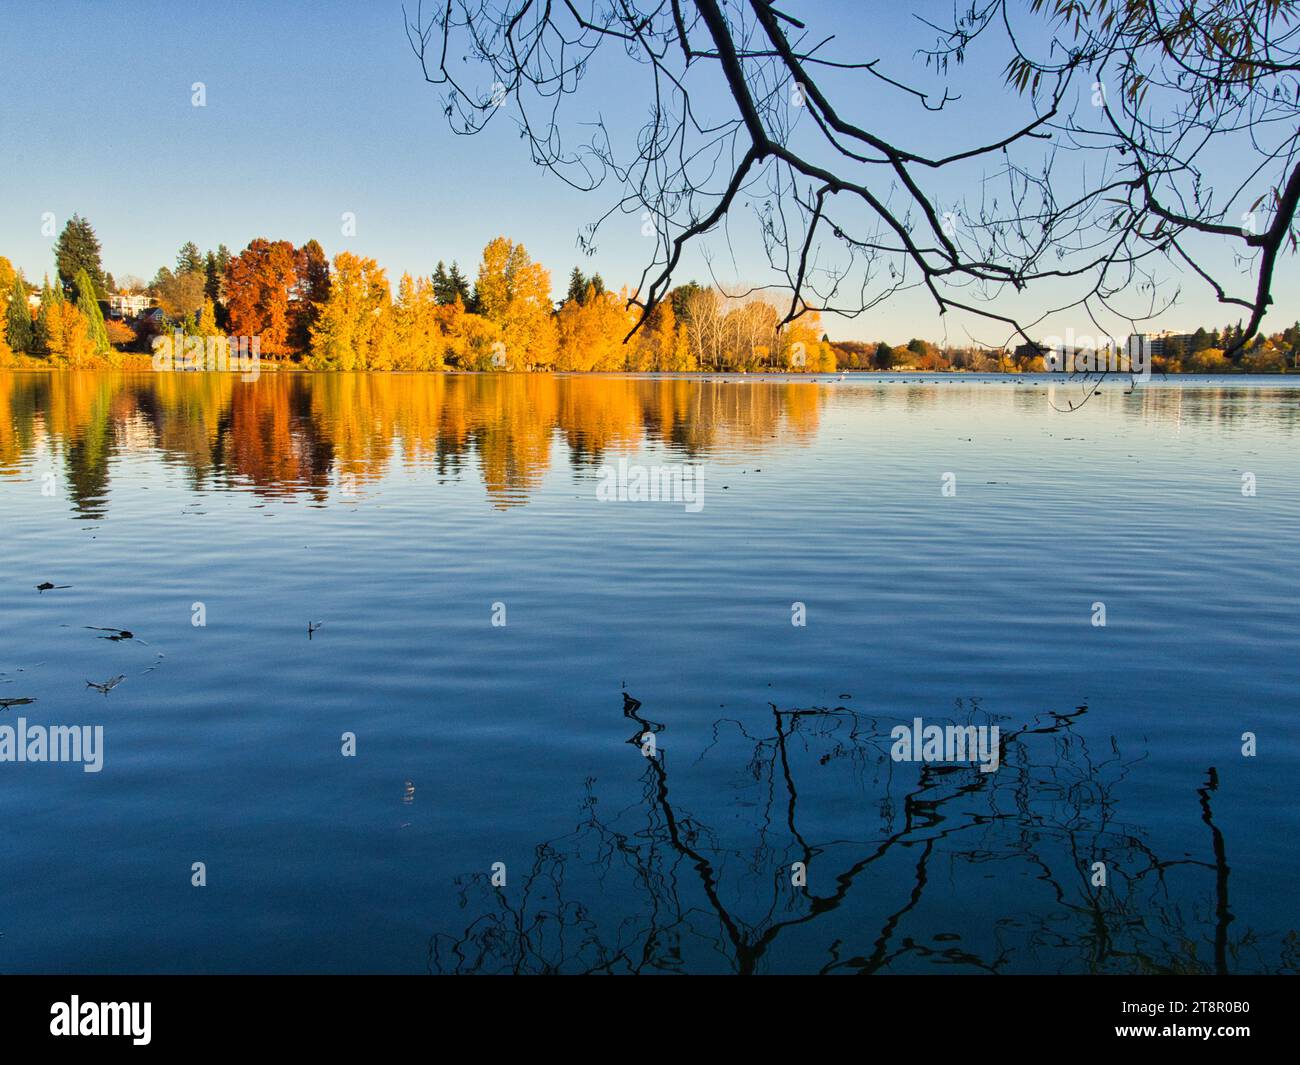 Landscape across peaceful lake with beautiful yellow fall foliage in the distance and bare tree branch reflection on water's surface. Golden hour. Stock Photo